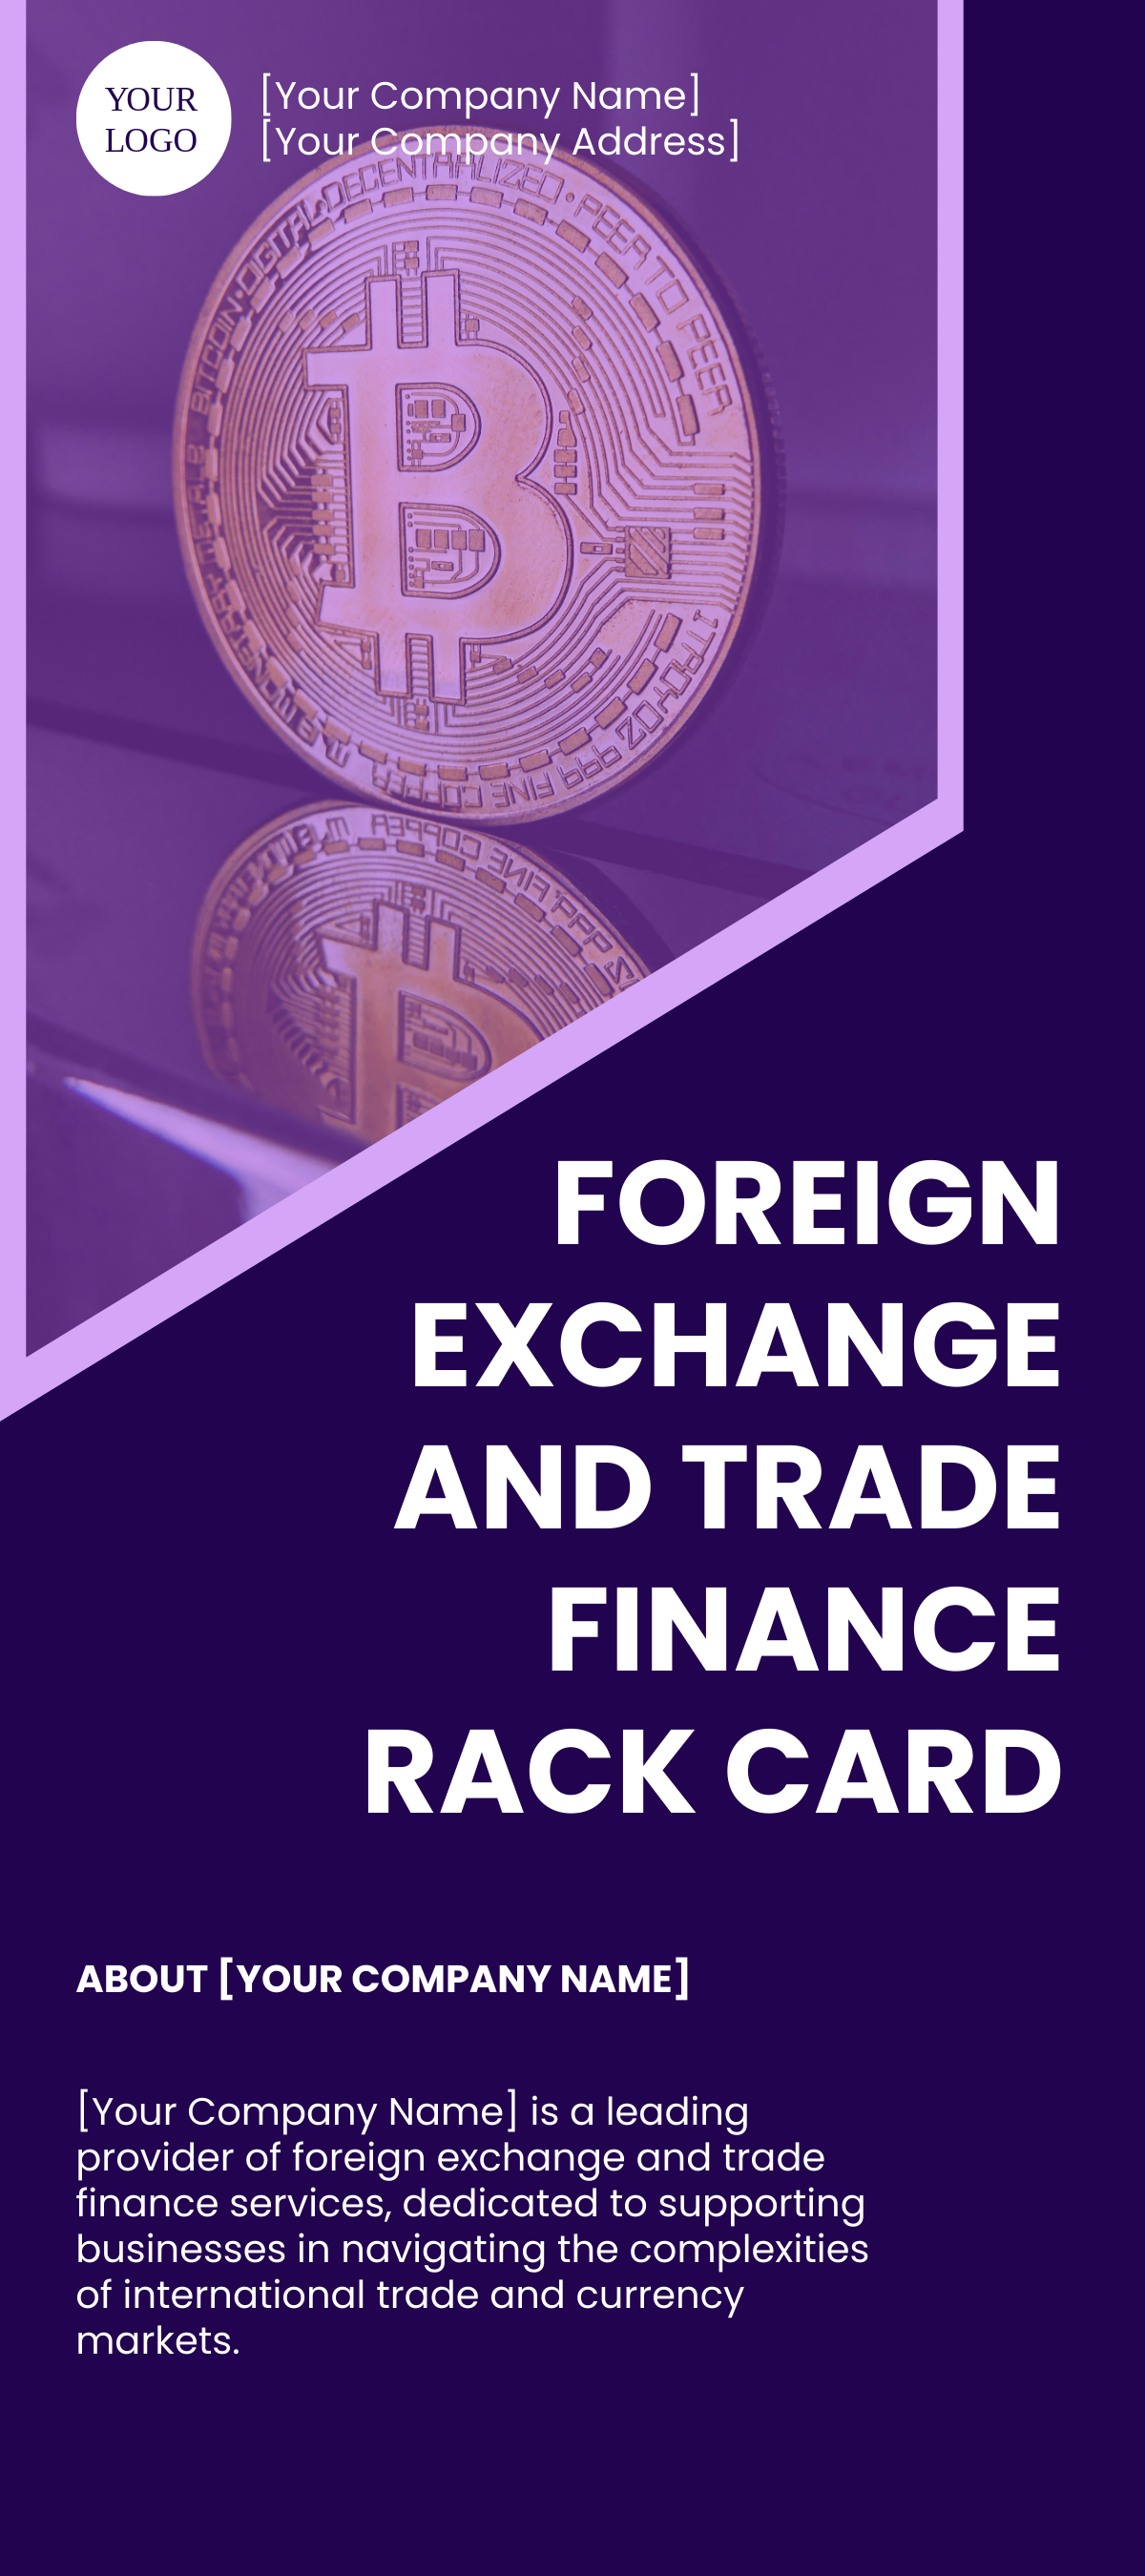 Foreign Exchange and Trade Finance Rack Card